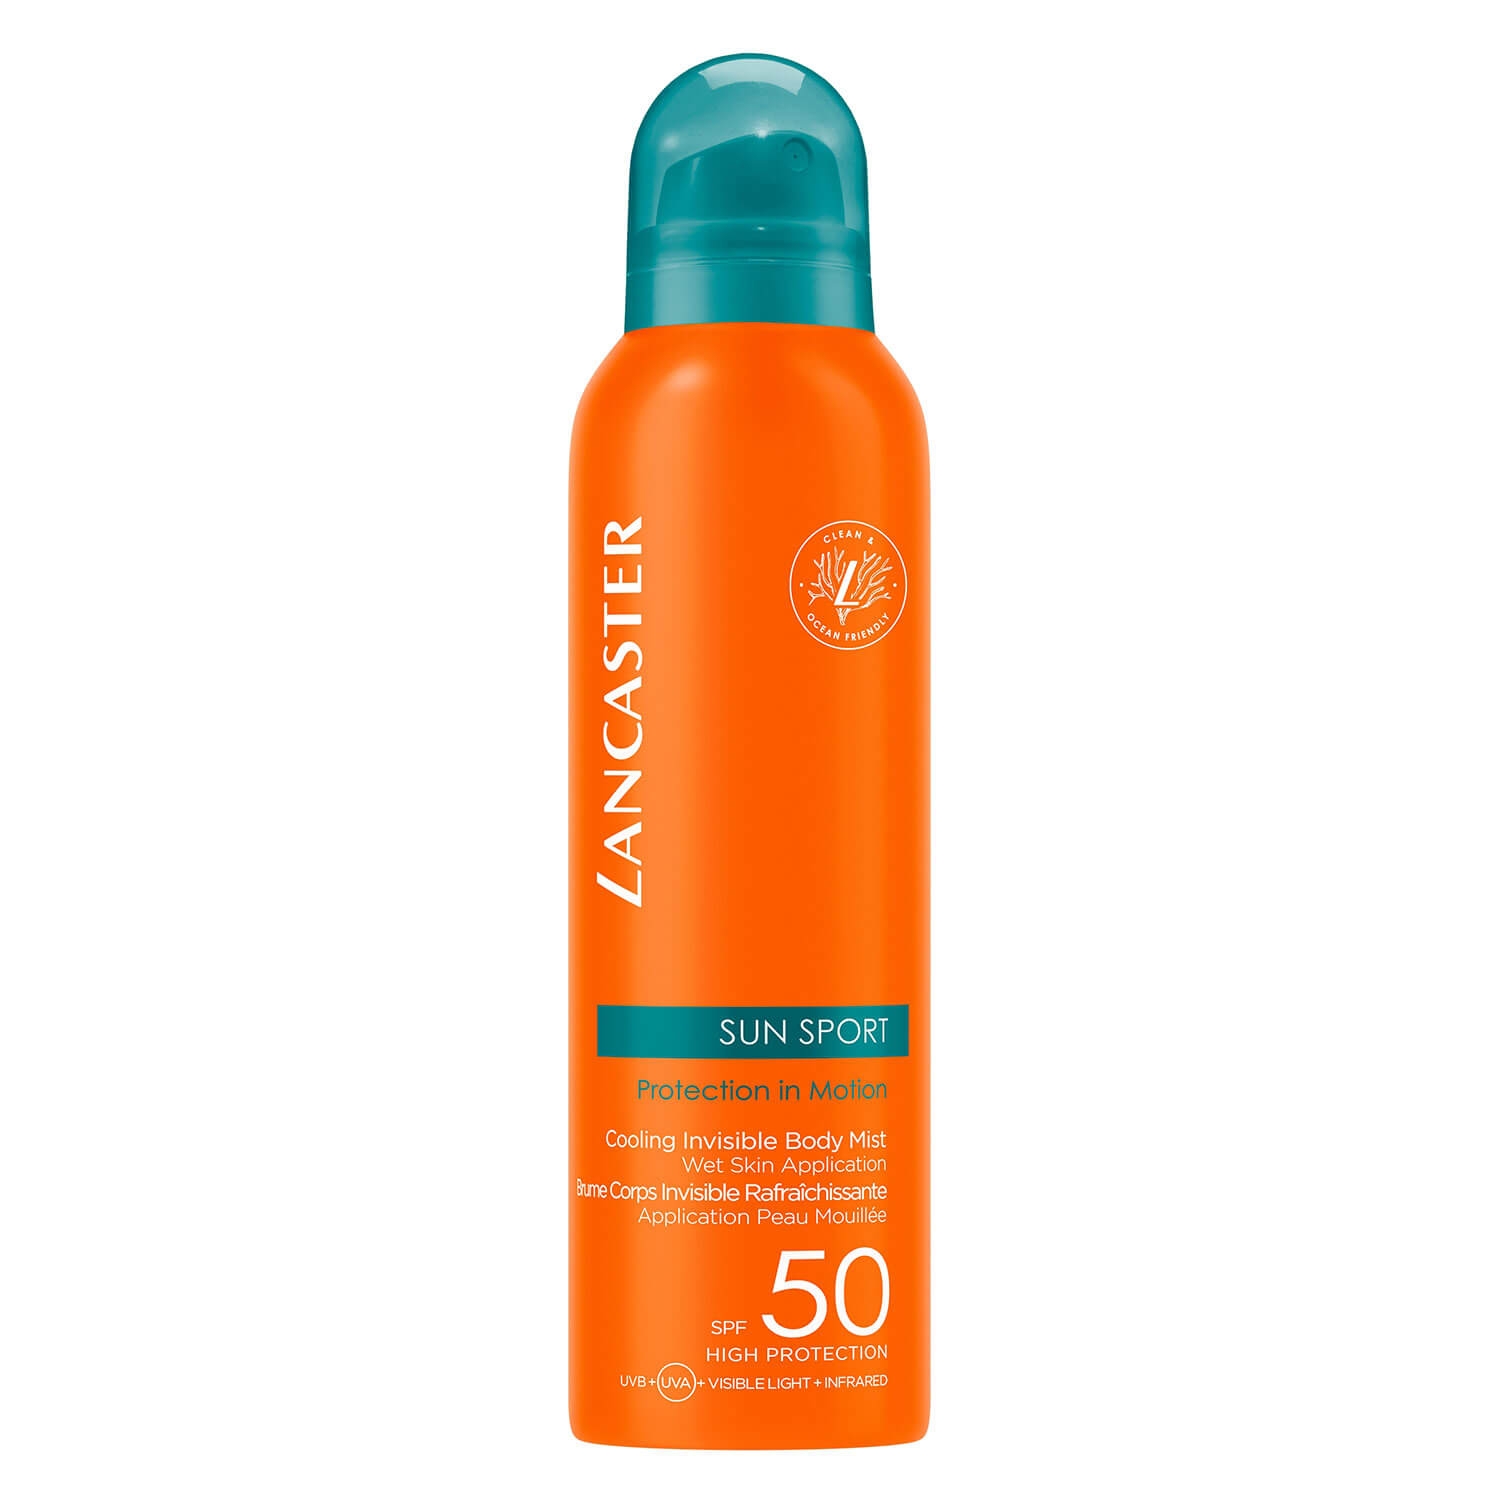 Product image from Sun Sport - Cooling Invisible Body Mist SPF50